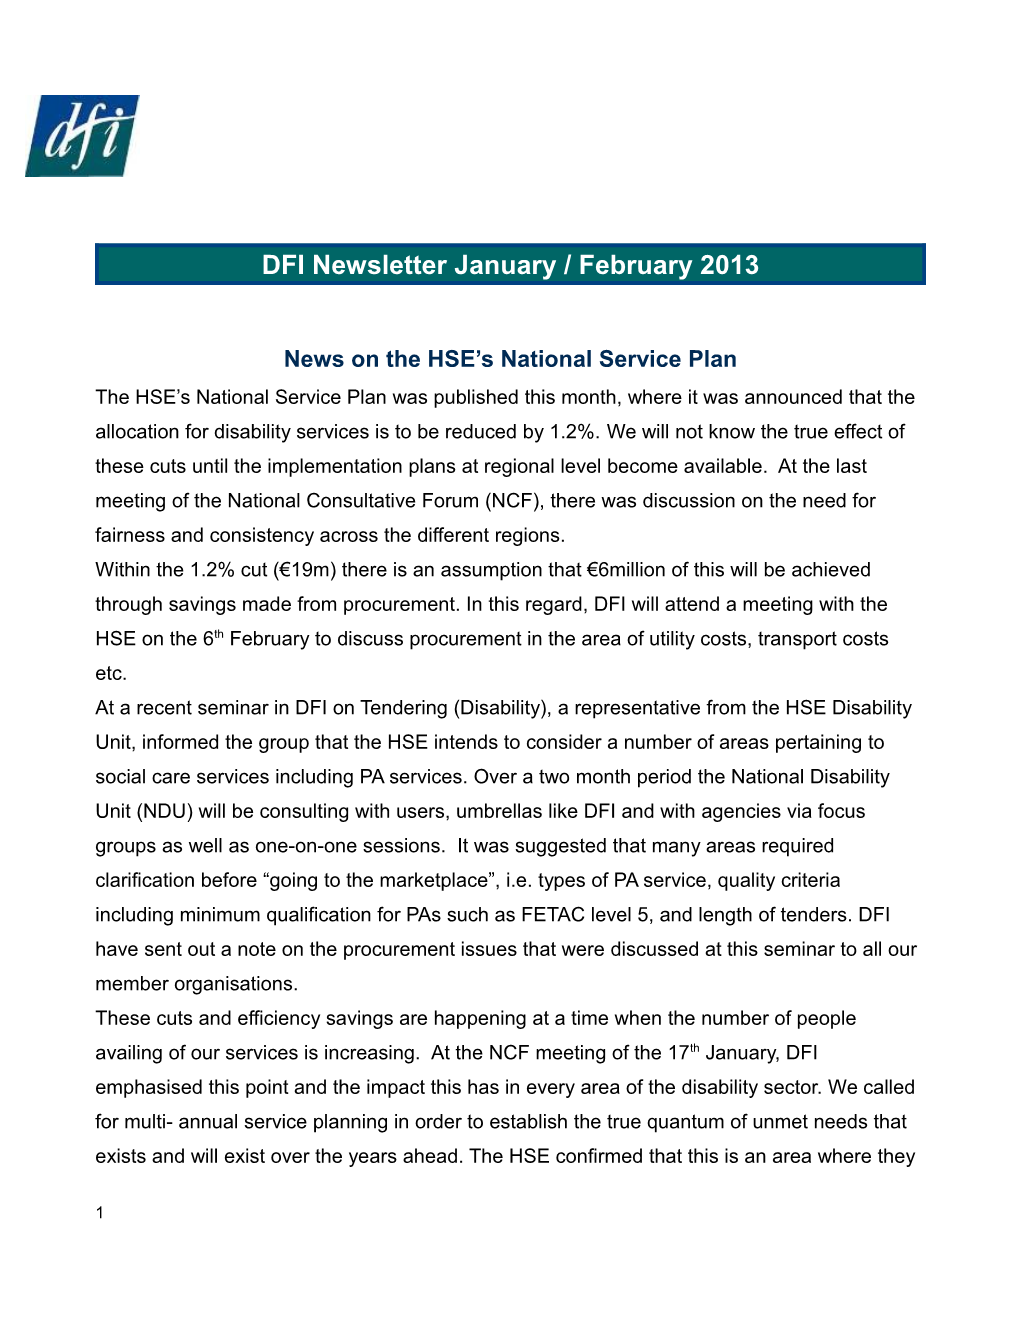 News on the HSE S National Service Plan